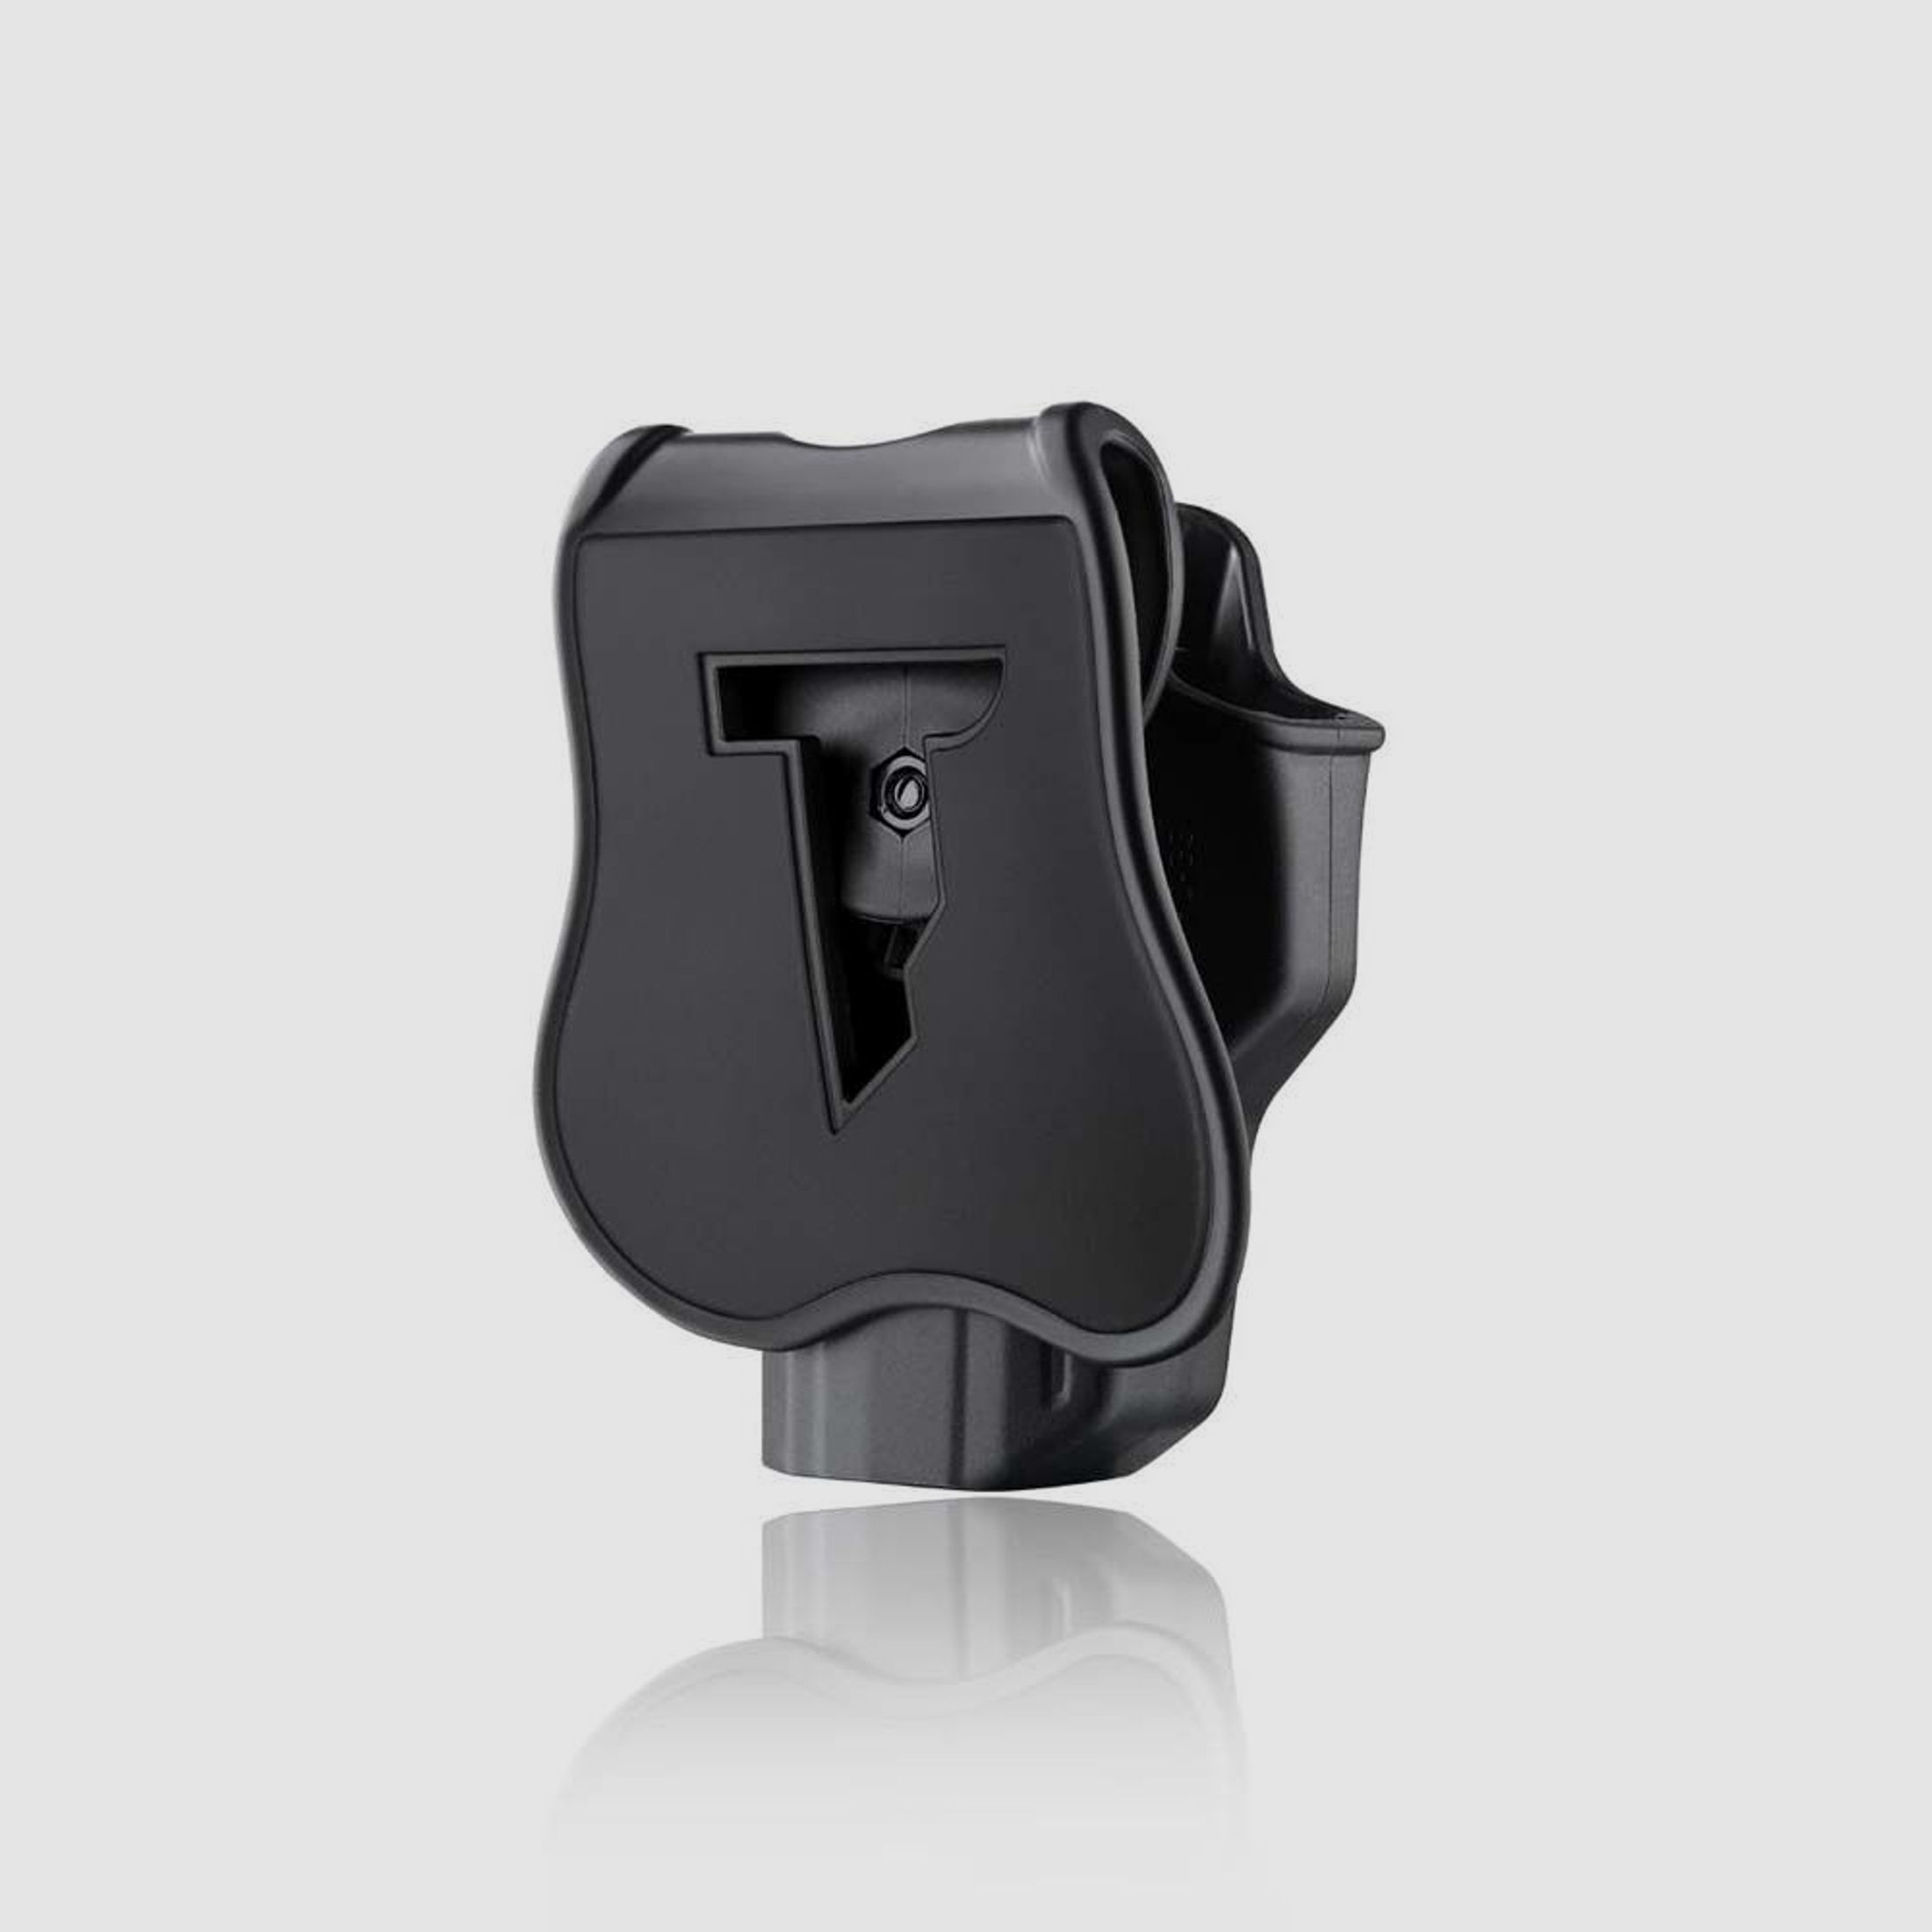 Cytac R-Defender Paddle Holster Walther PPQ M2, M3